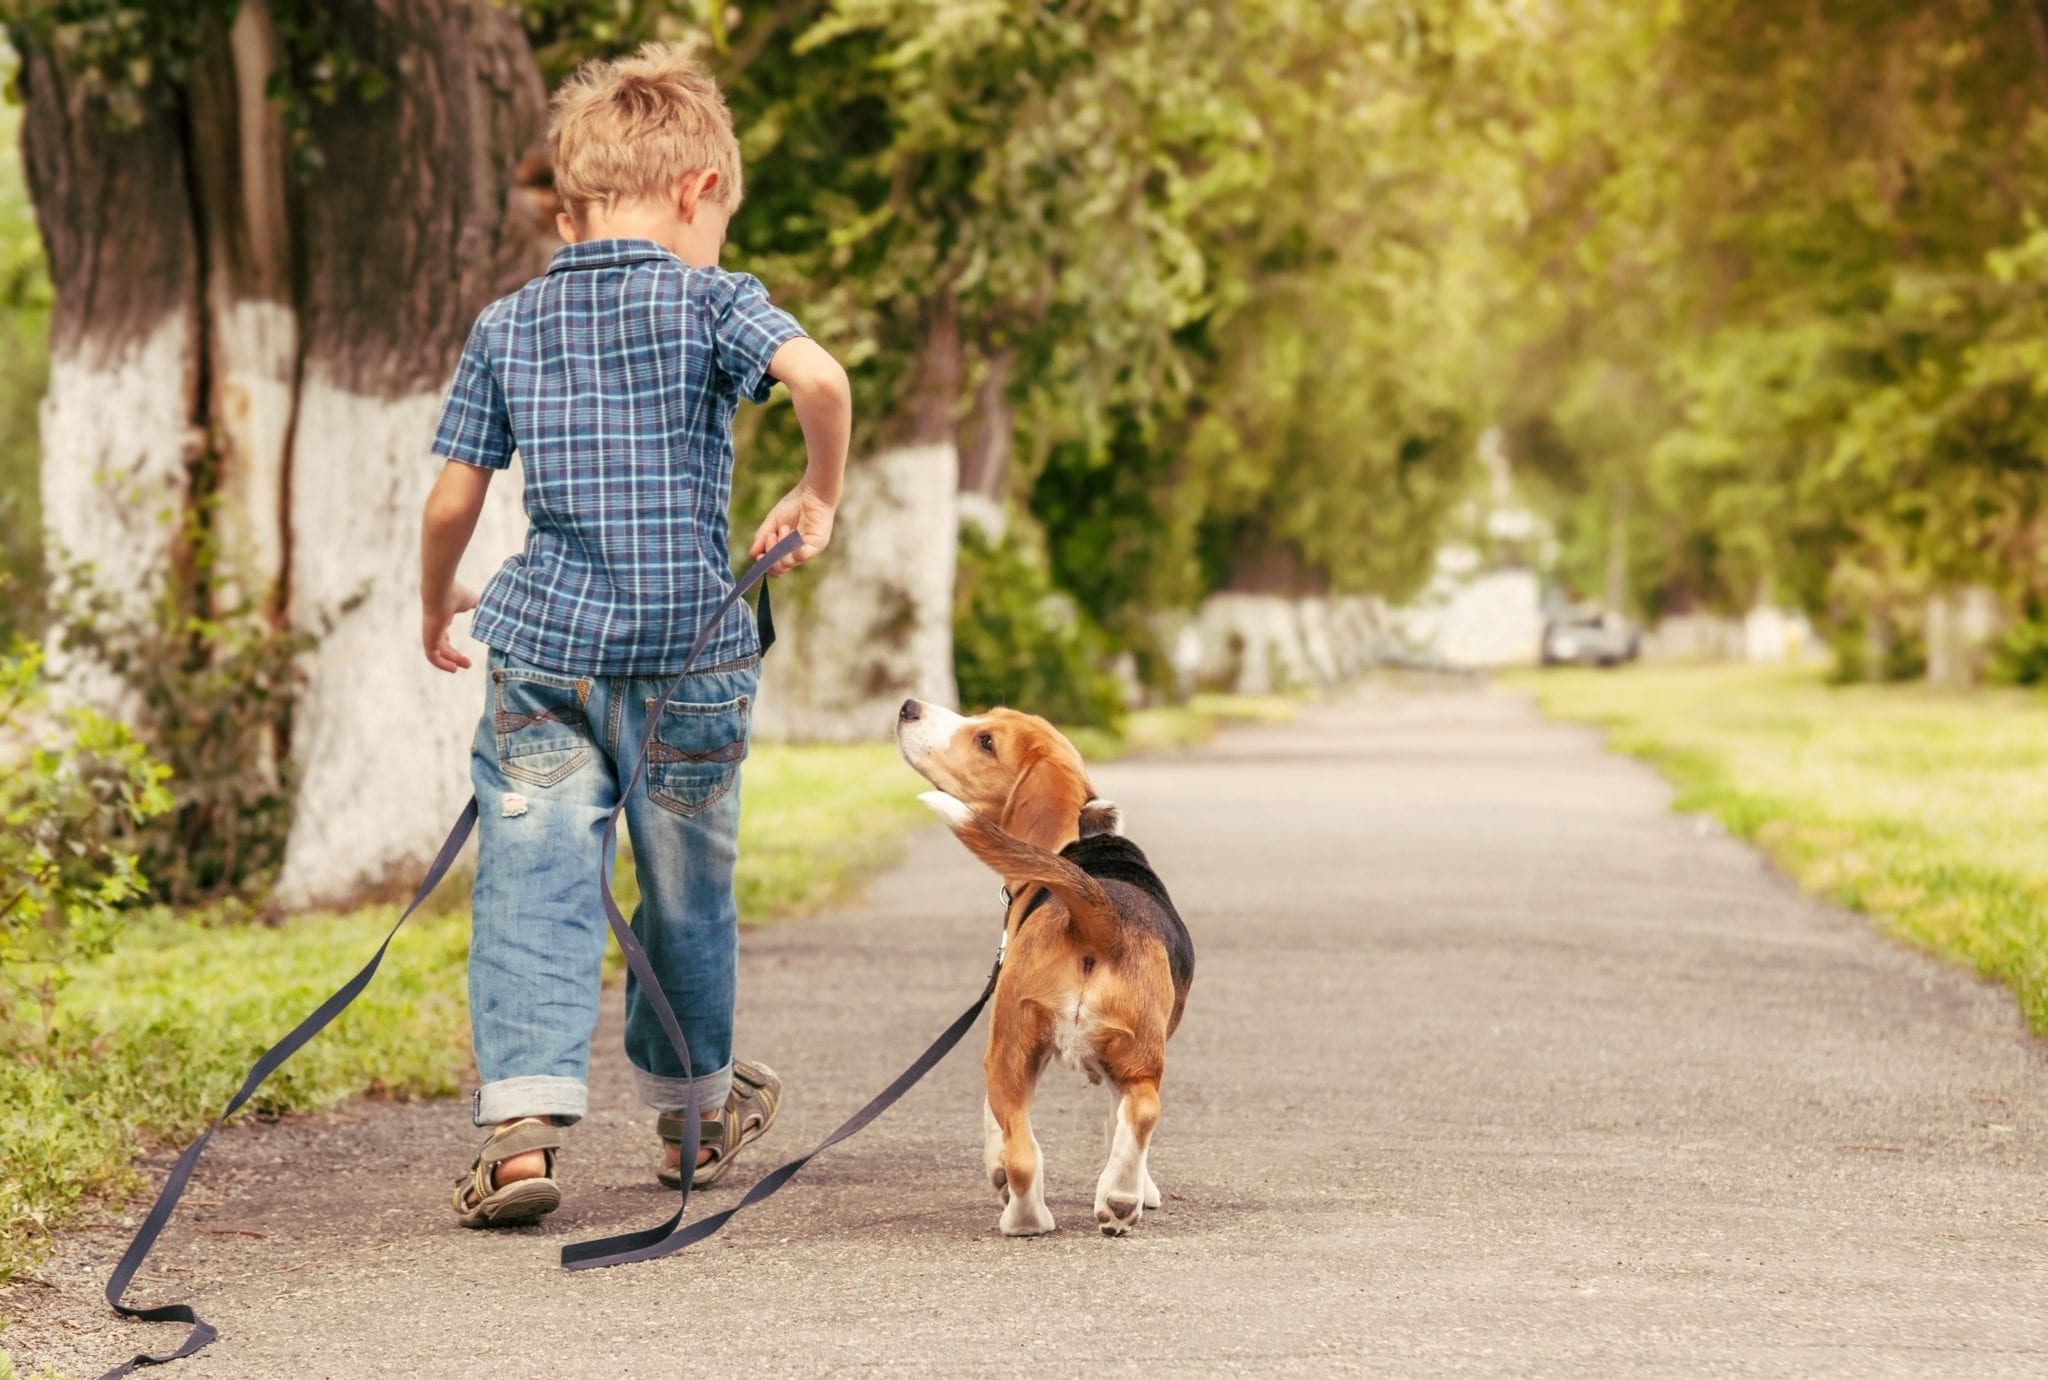 Leash training, like any other kind of dog training, benefits both you and your dog